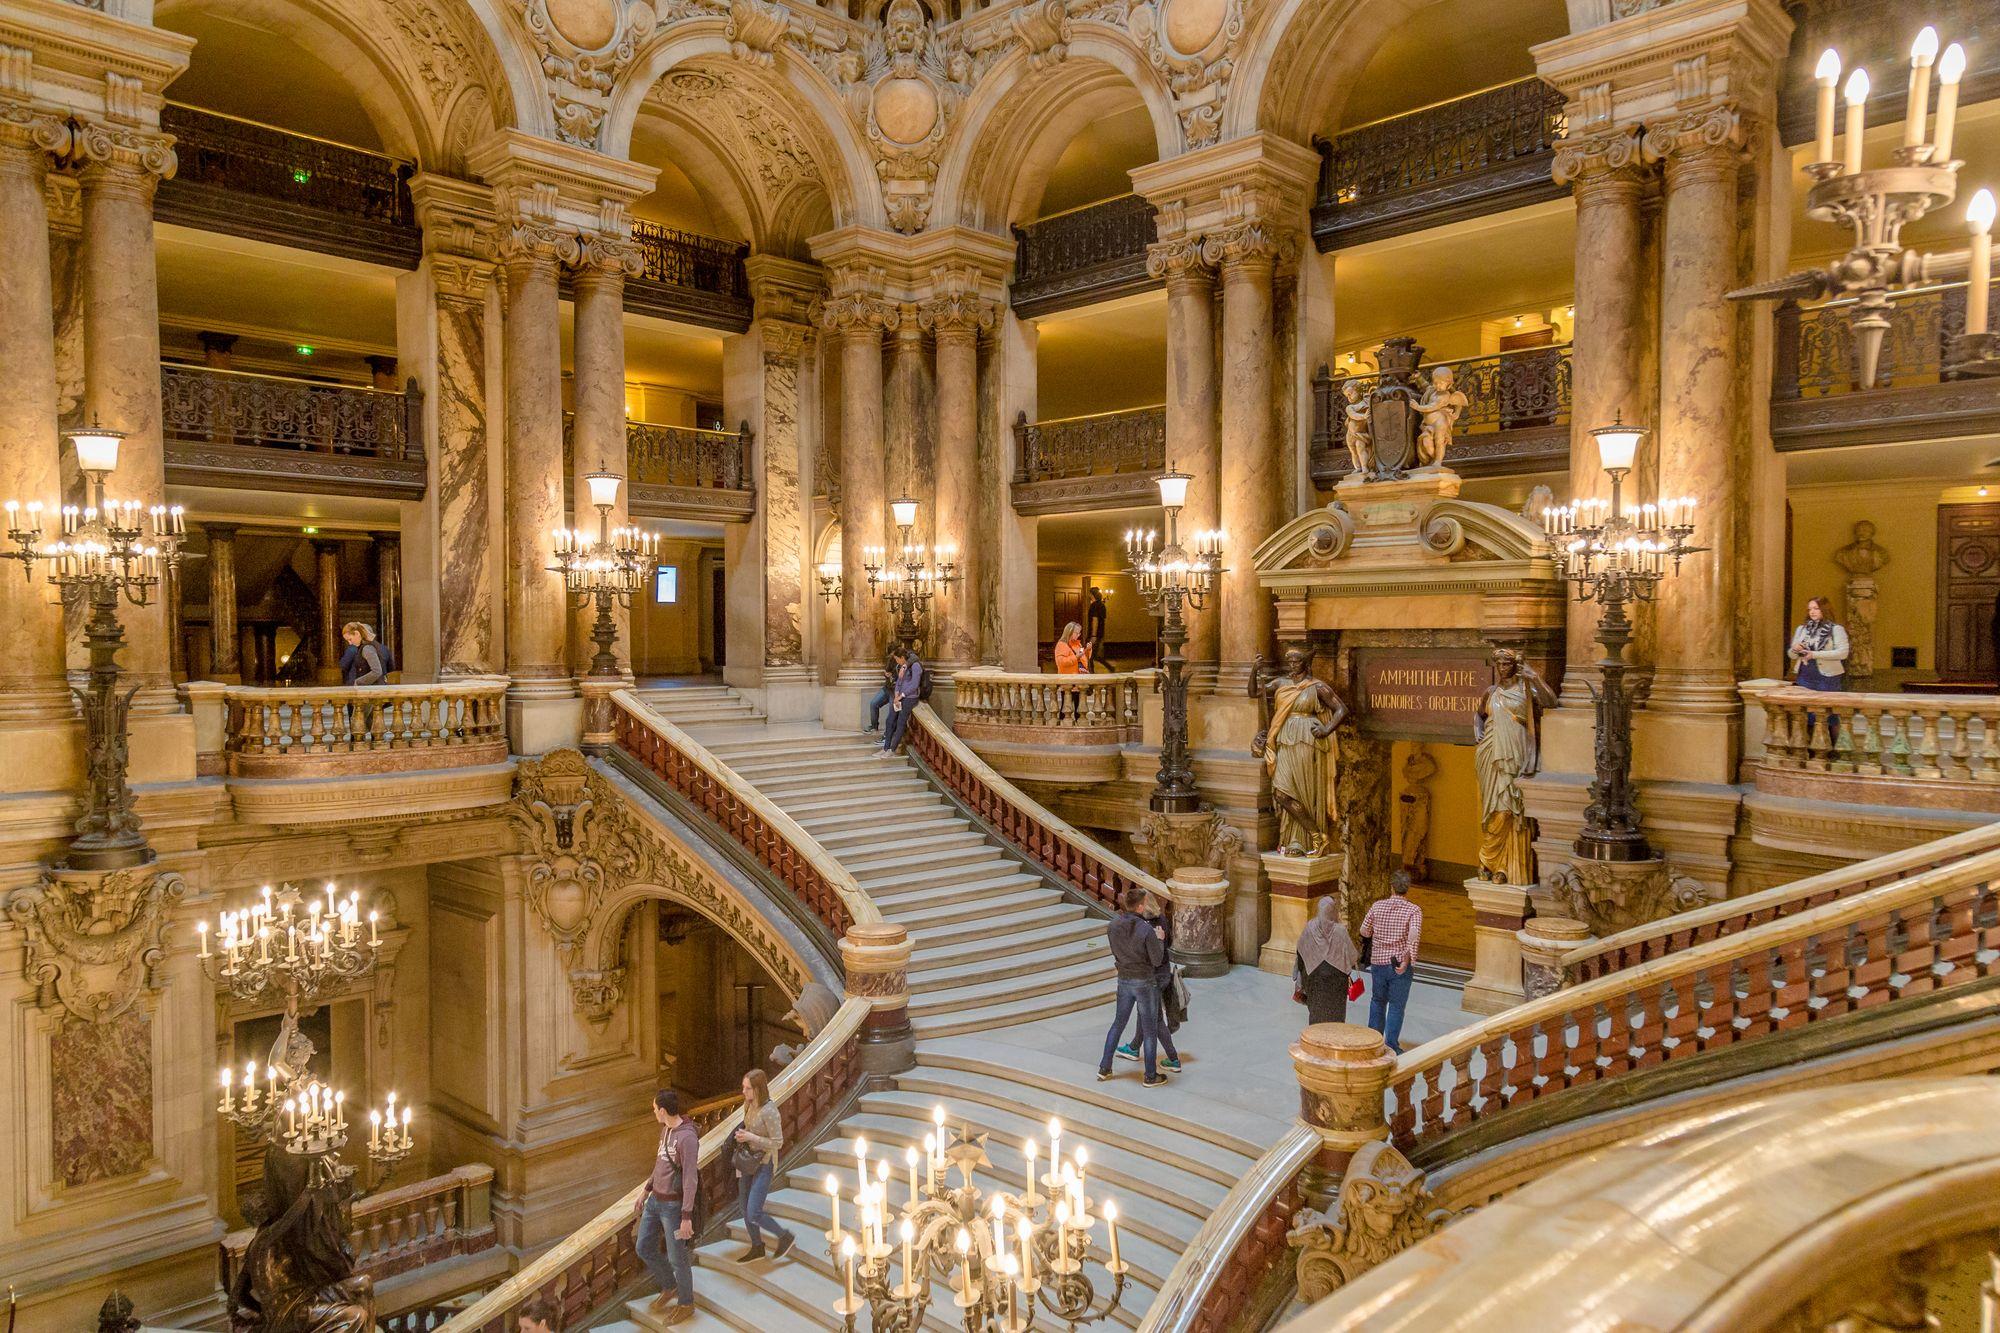 From the Hotel Gramont, visit the majestic stairs of the Opera Garnier